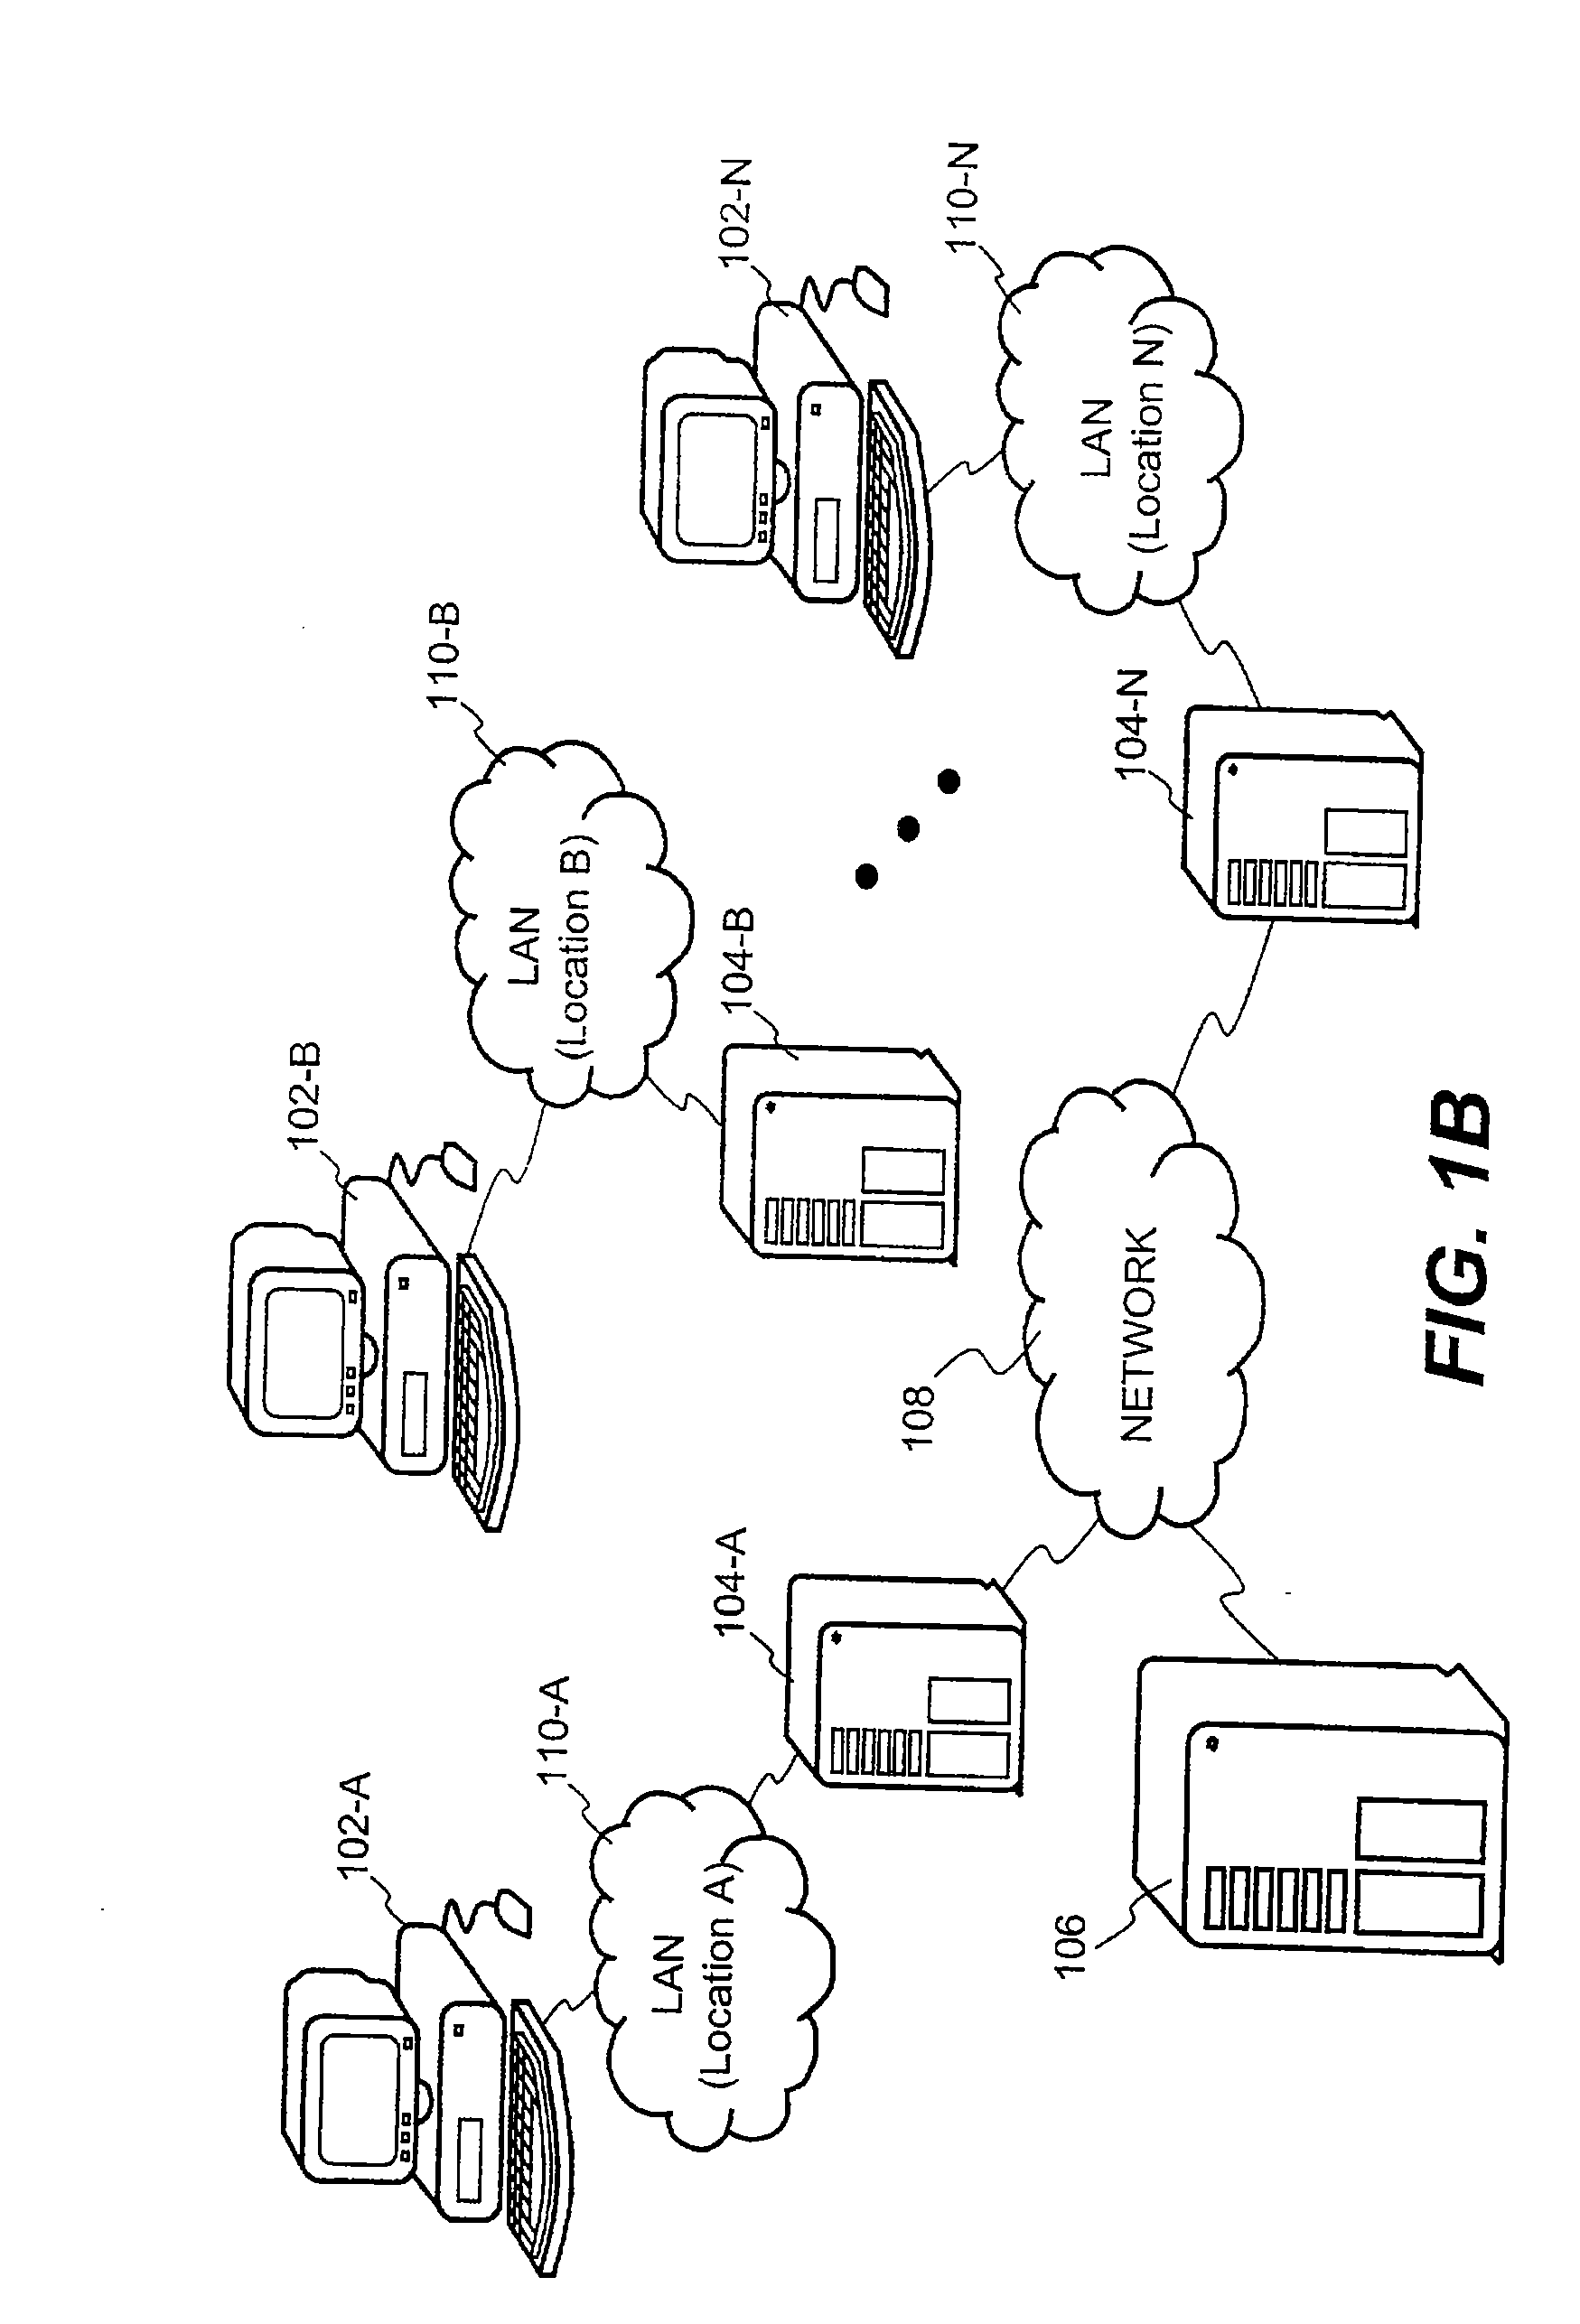 Methods and systems for providing access control to secured data